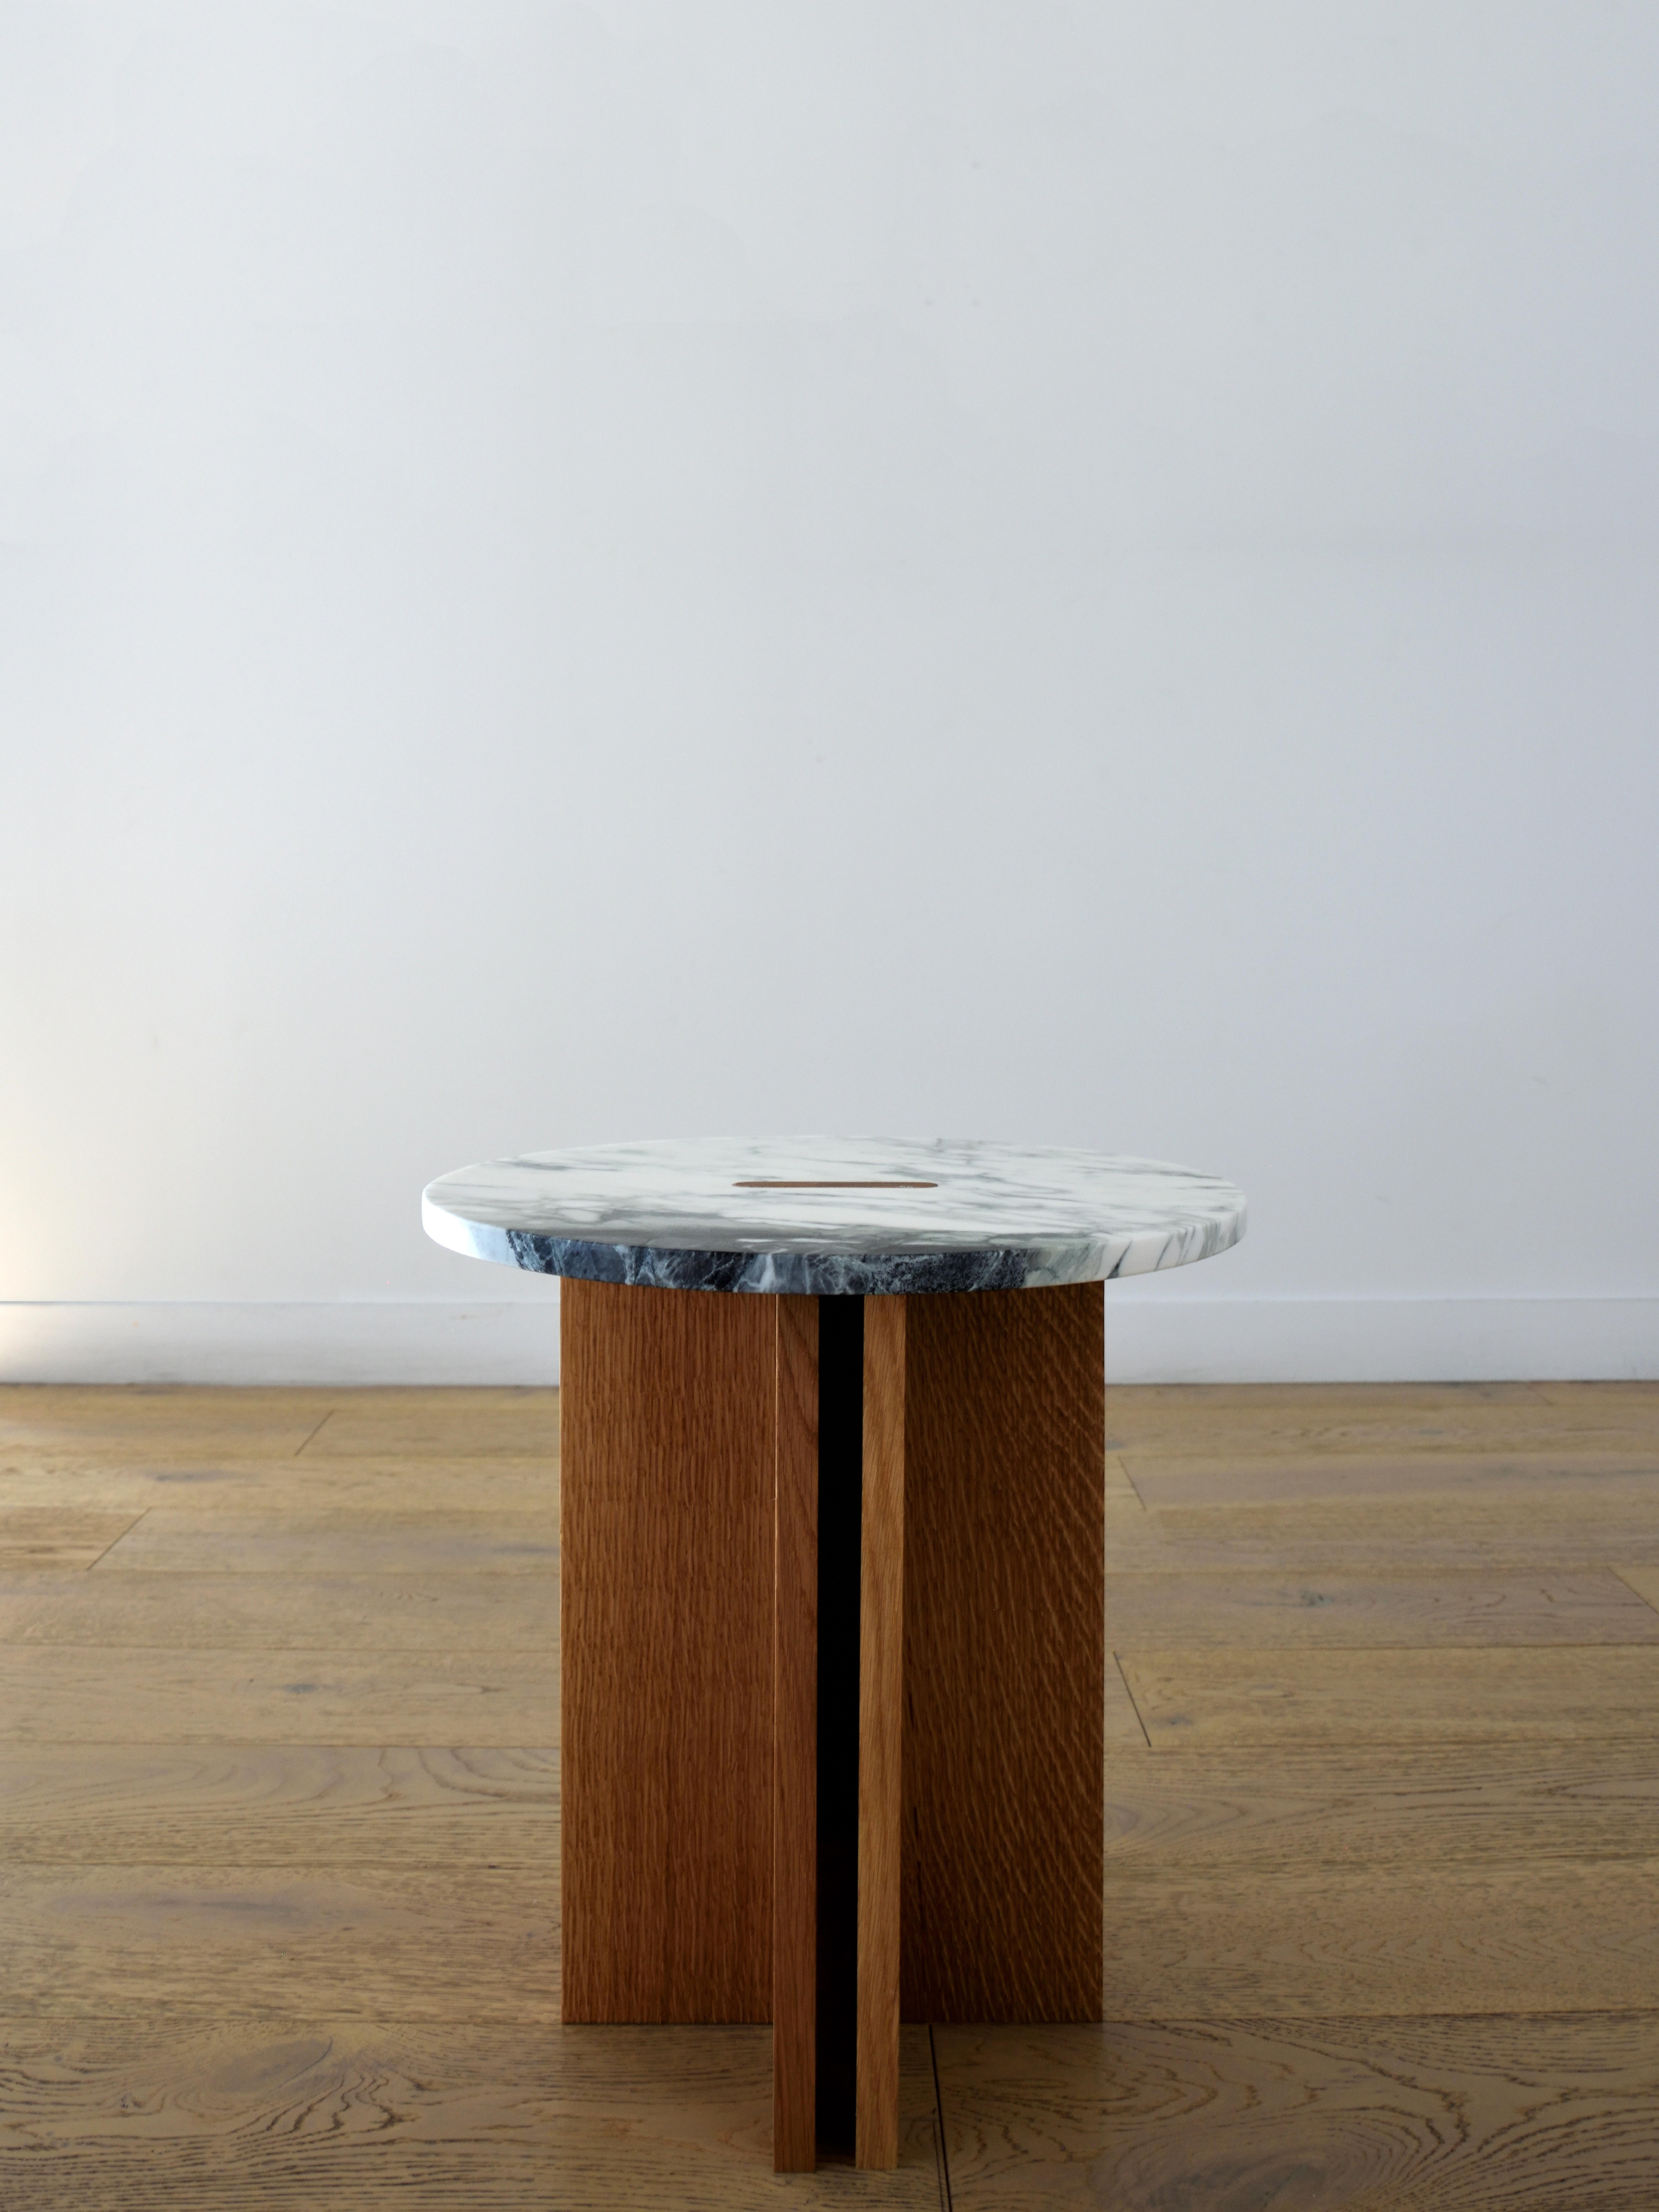 The Interlock End Table series are inspired by Hanok, Korea’s traditional houses first designed and built in the 14th century during the Joseon dynasty. Its architectural joinery details of wooden plates interlock and create perfect tension, balance